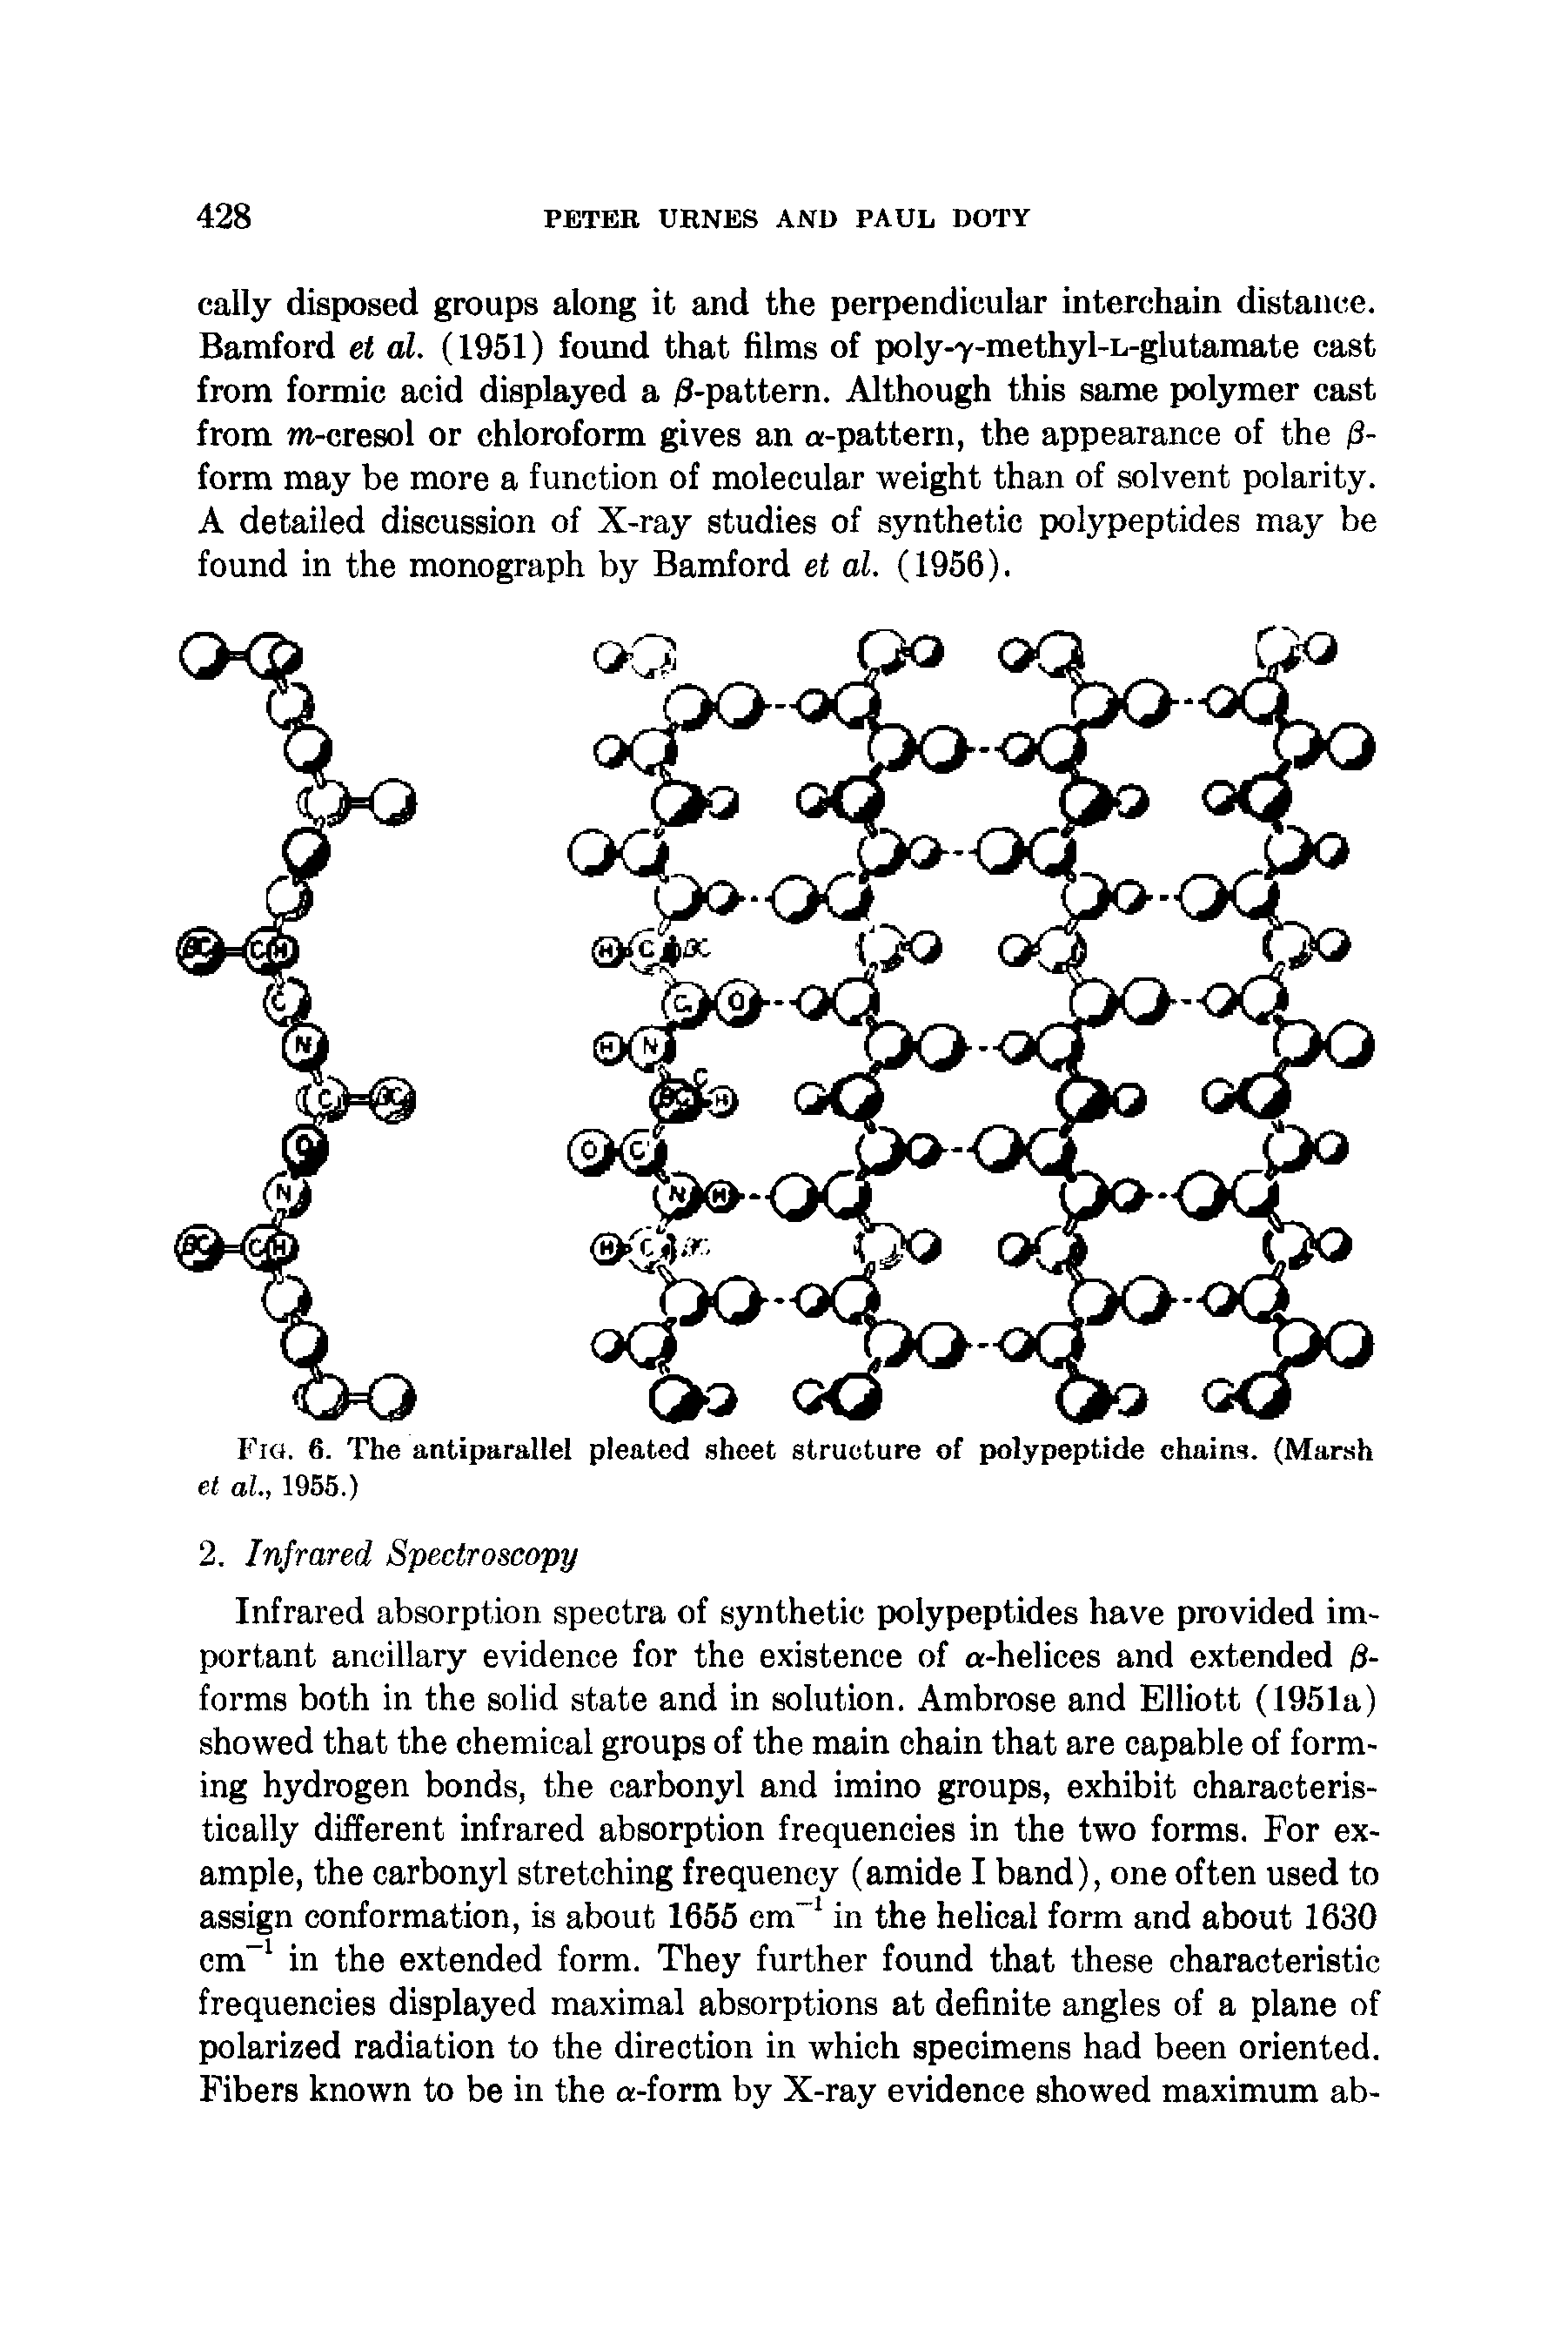 Fig. 6. The antiparallel pleated sheet structure of polypeptide chains. (Marsh et al, 1955.)...